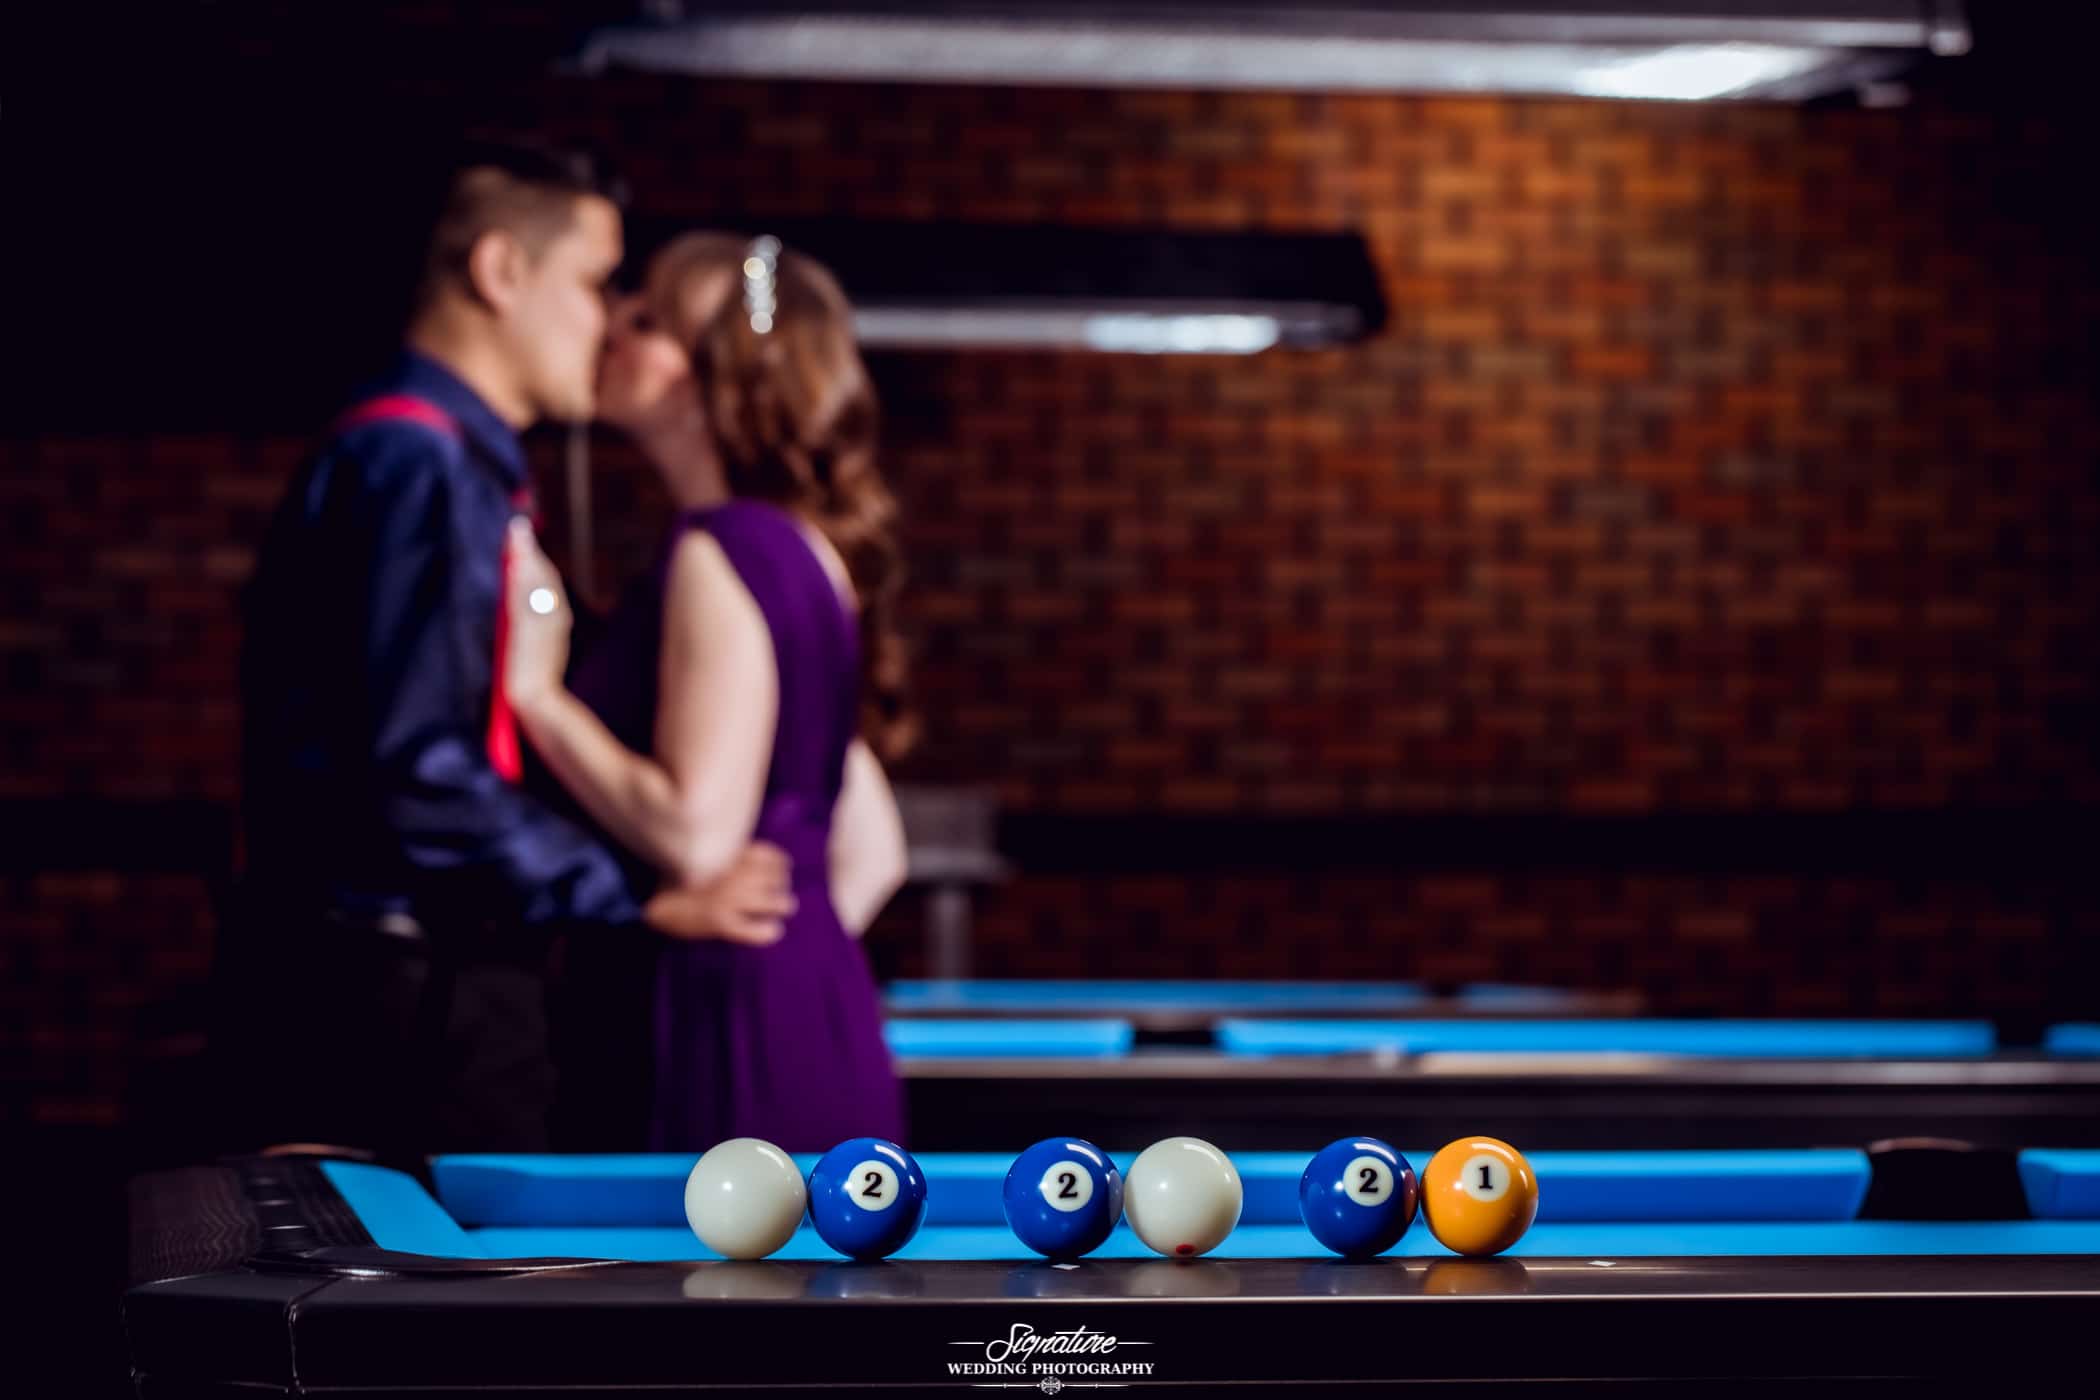 Couple kissing behind billiards table with date on billiard balls